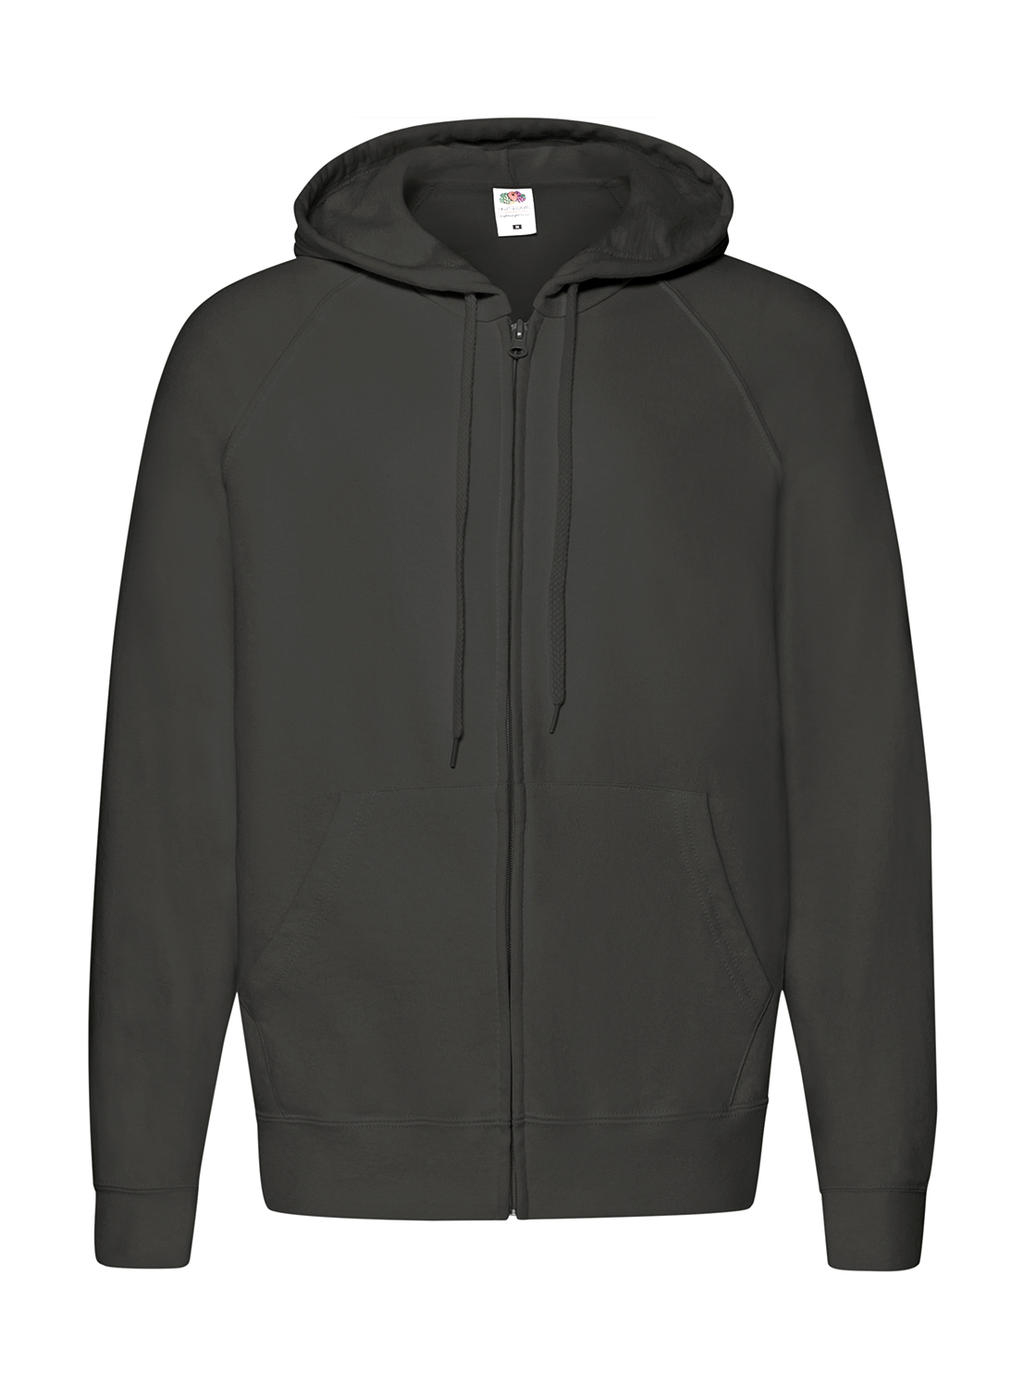  Lightweight Hooded Sweat Jacket in Farbe Light Graphite